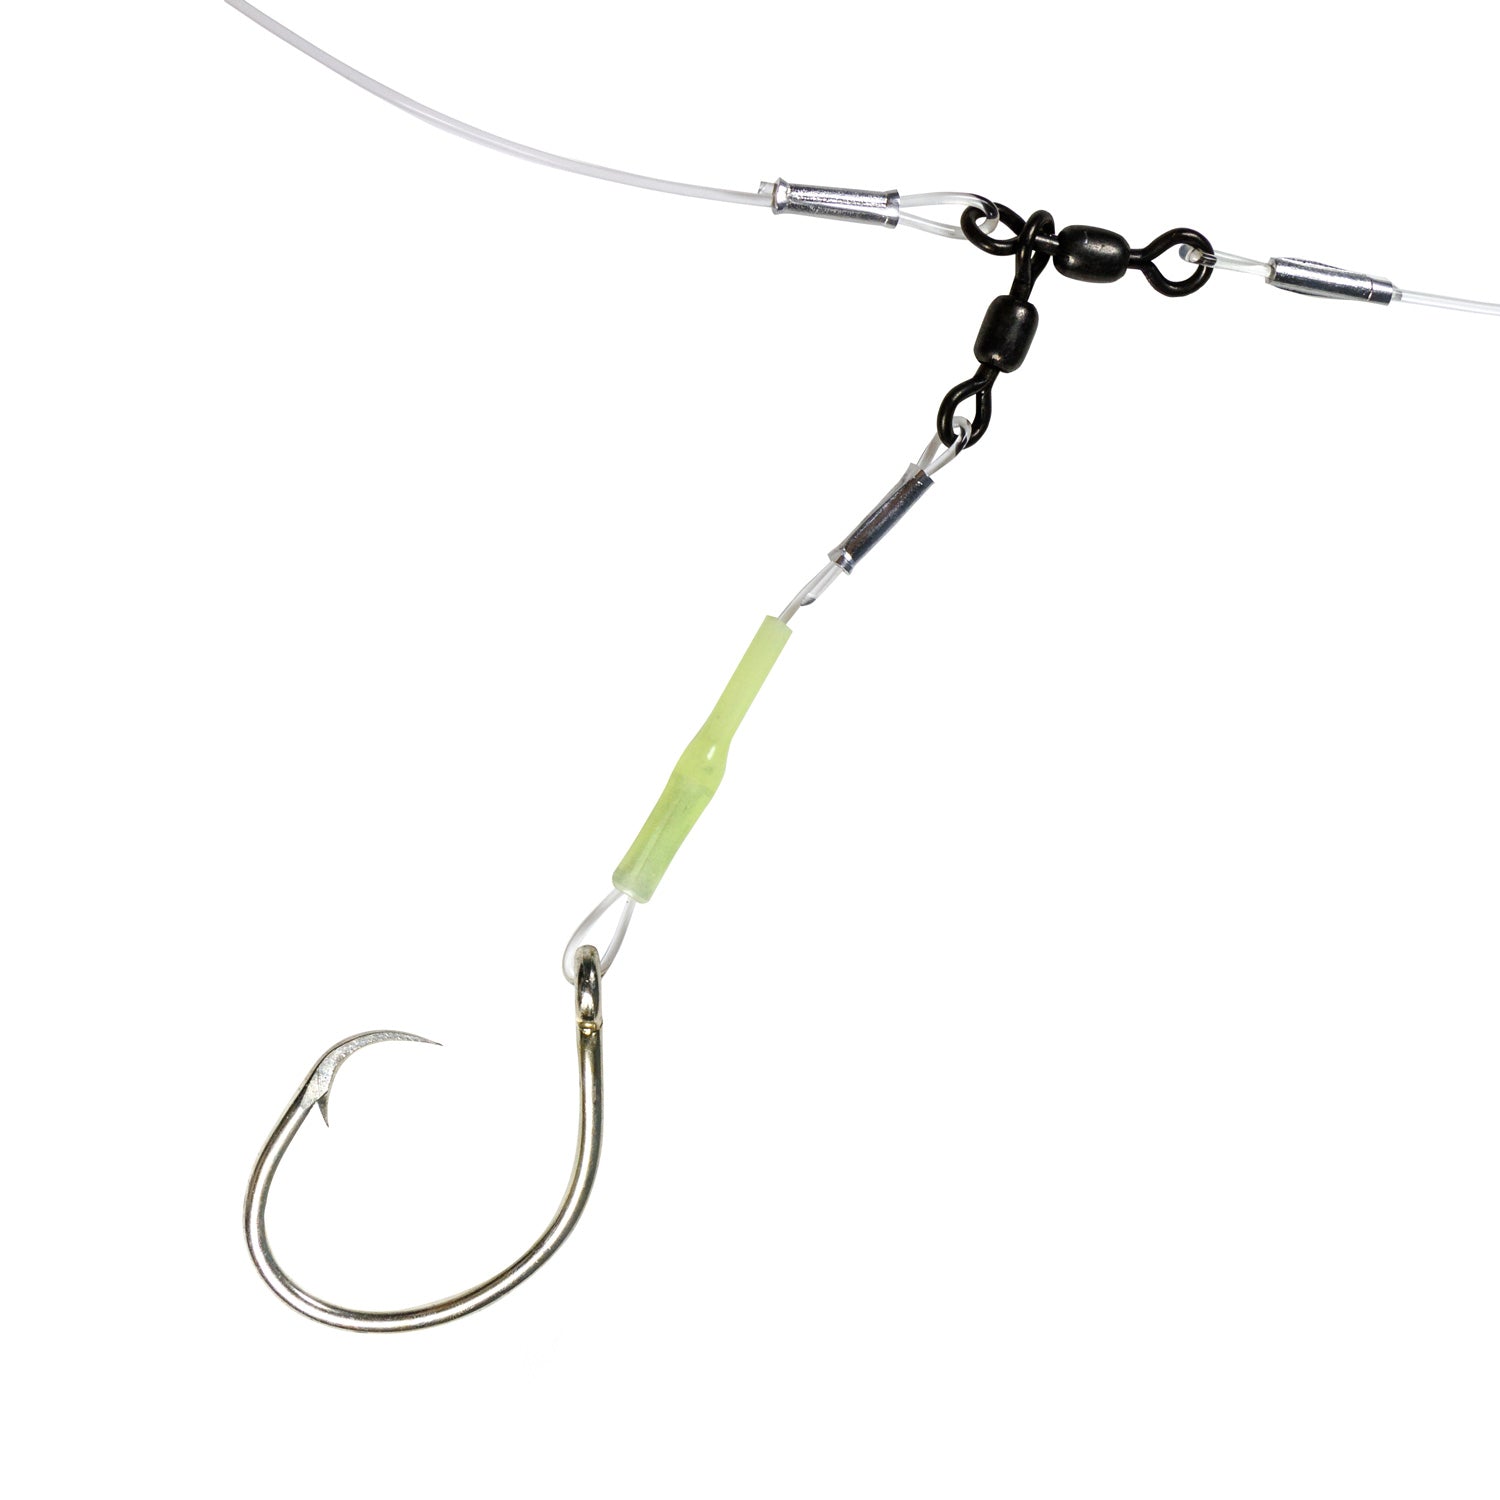 Premium Deep Drop Rig, 4 Hook Deep Drop Fishing Rig with SolidSquidz,  Excellent for Grouper, Golden Tilefish, Wreckfish, Bottom Fishing Rig  (Solid Glow) : : Sports, Fitness & Outdoors